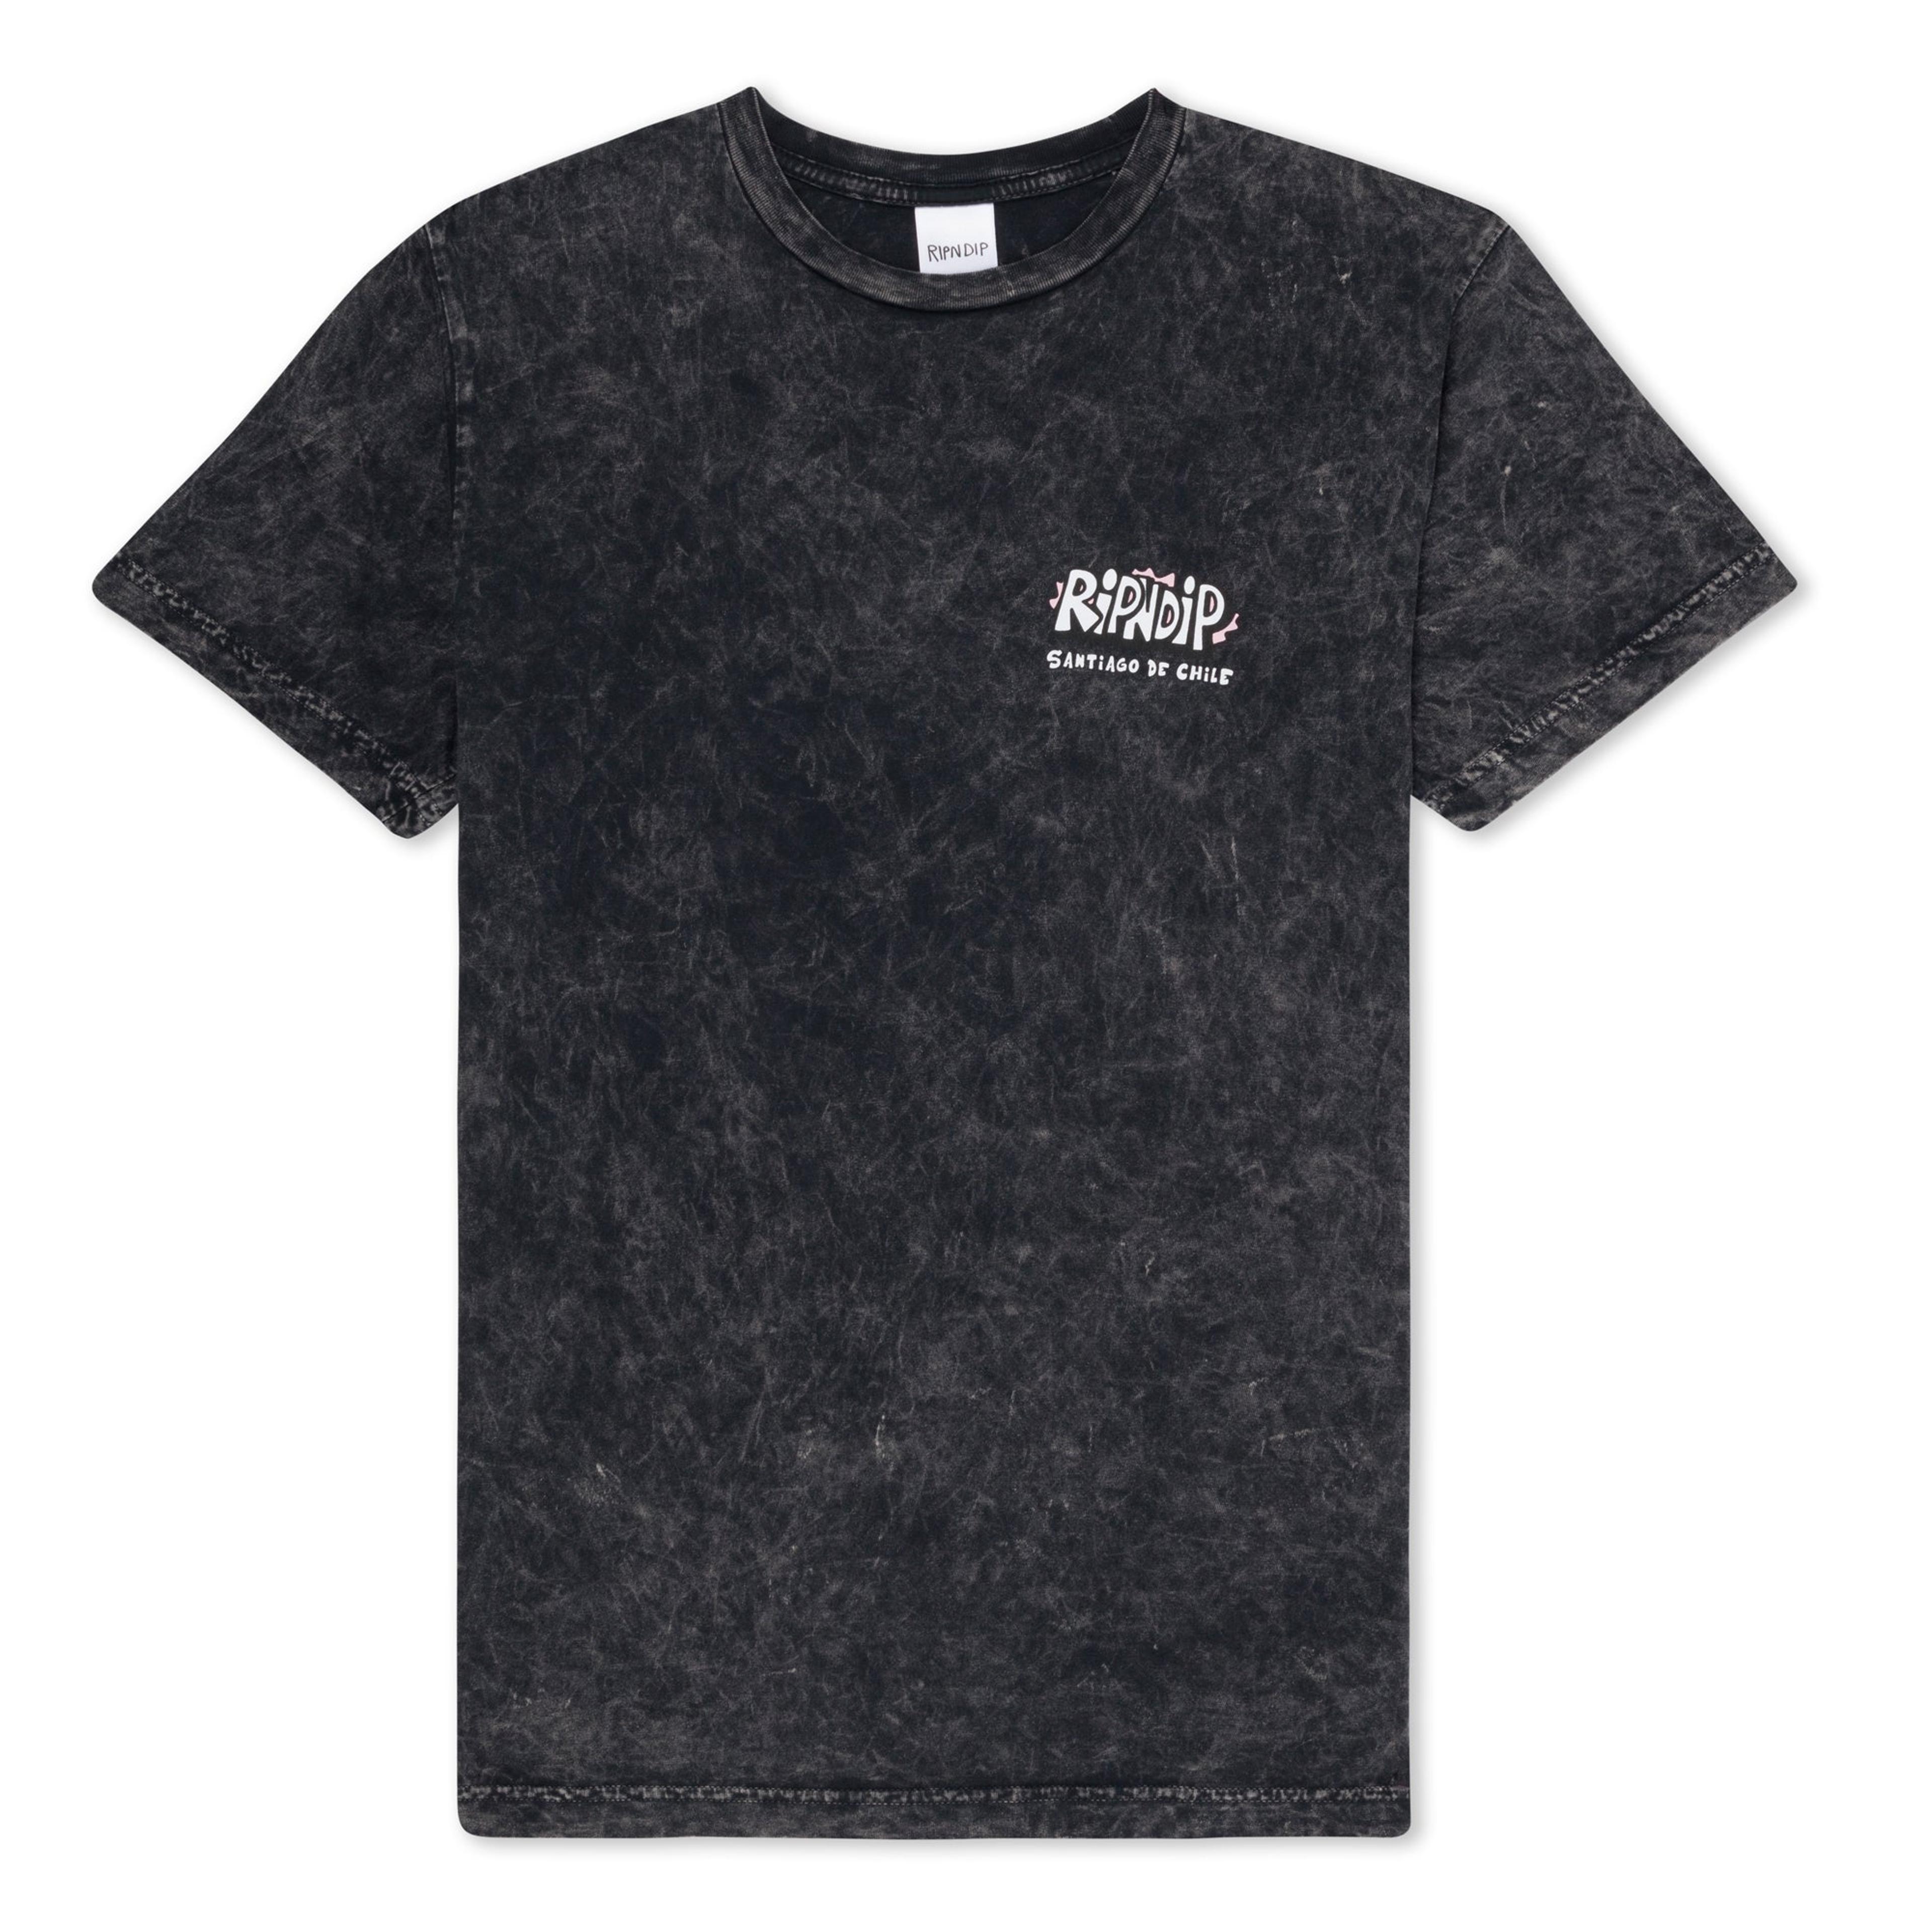 Alternate View 1 of Nerm In Chile Tee (Black Mineral Wash)